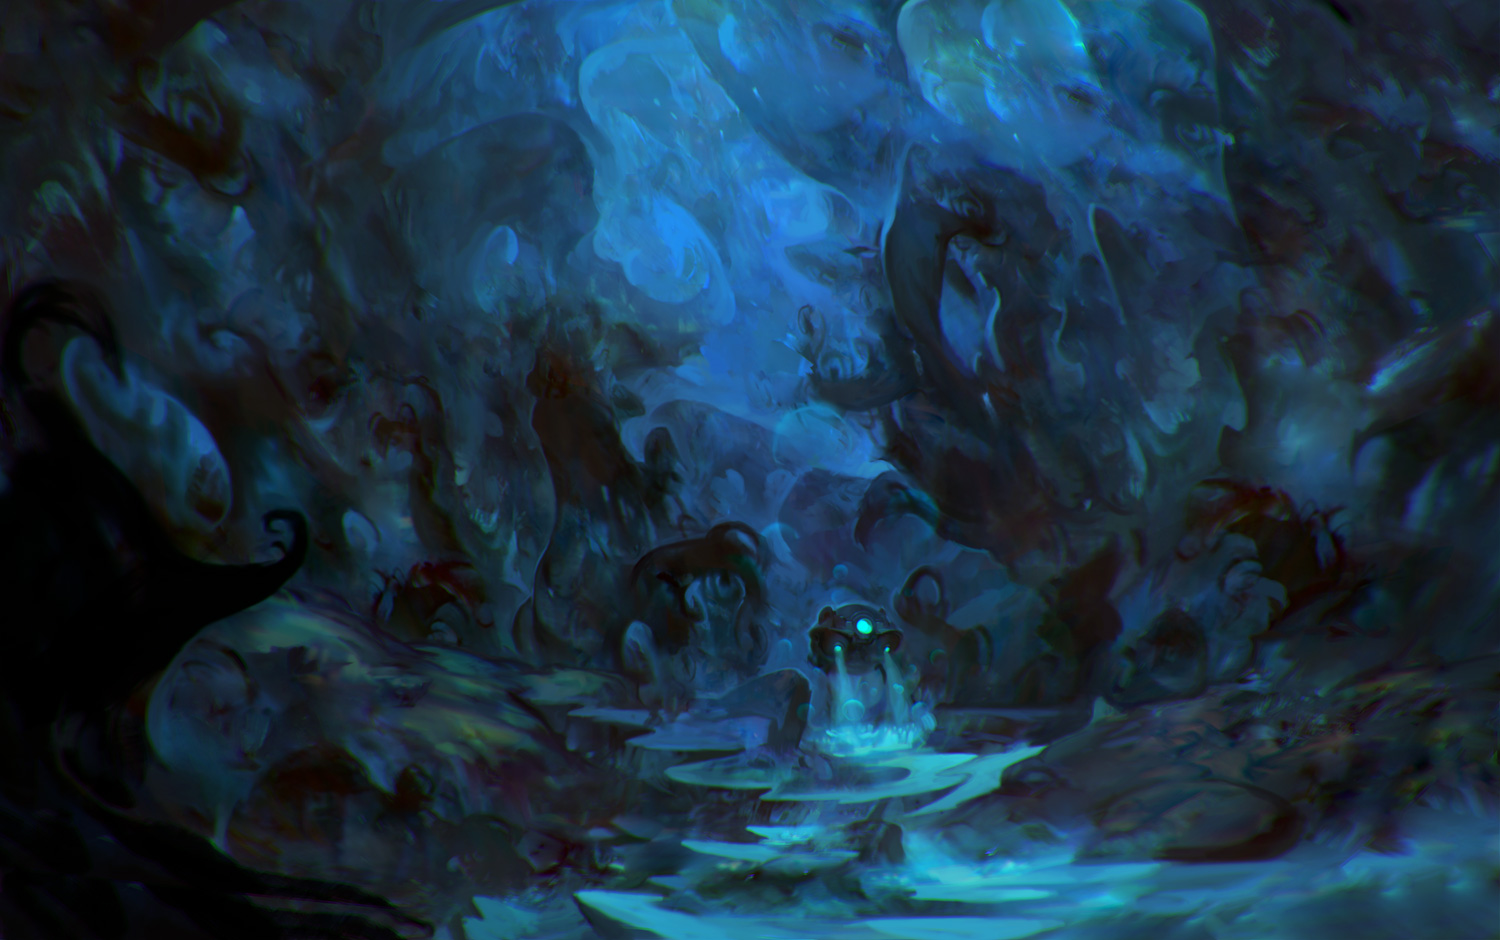 digital painting pf a submarine in an underwater cave